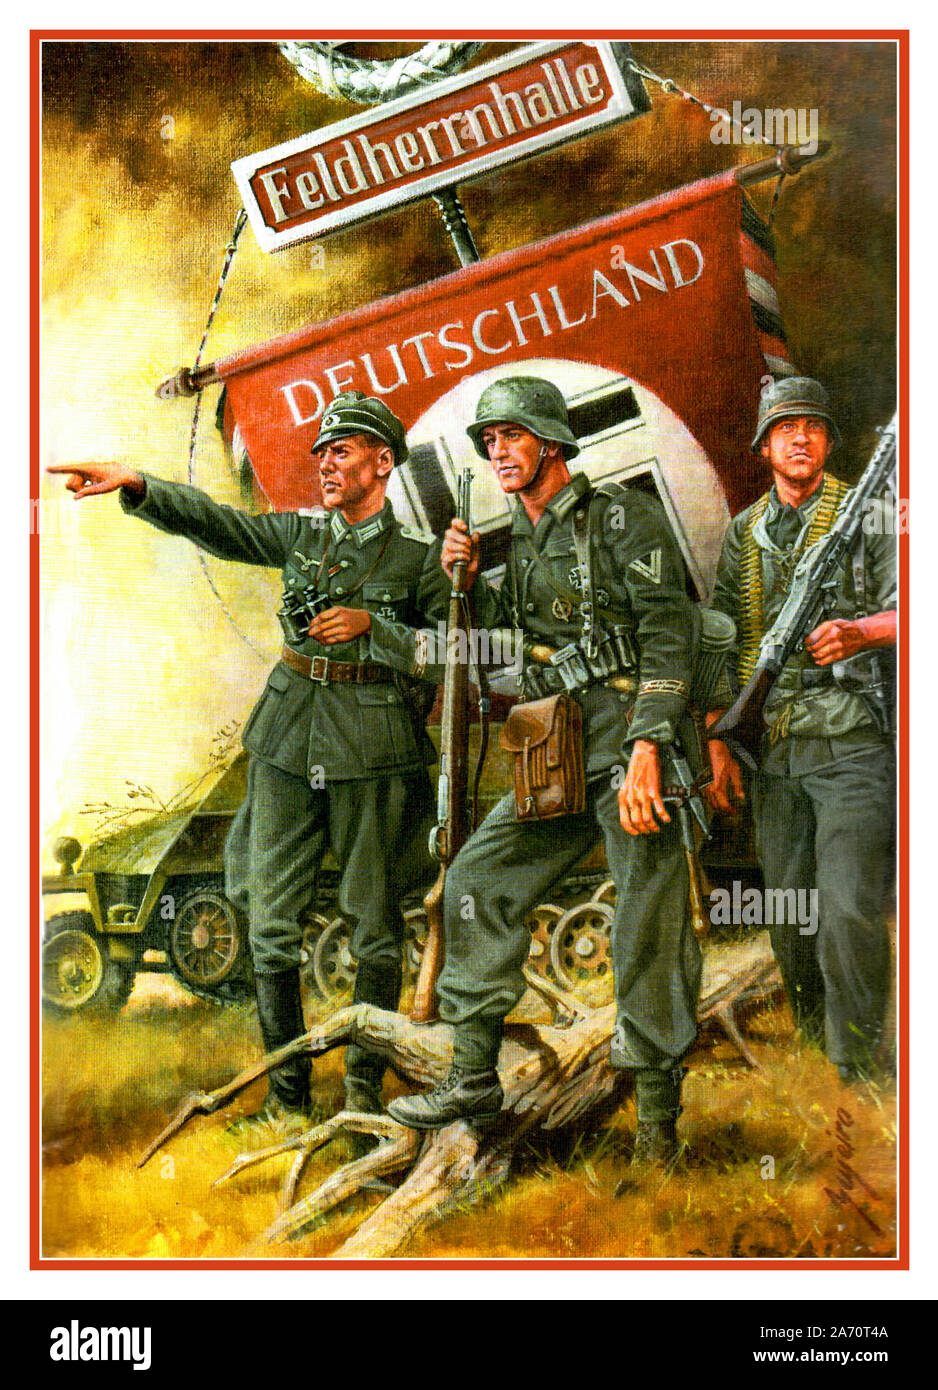 Vintage Nazi Germany Wehrmacht Army officer and soldiers the unified armed forces of Nazi Germany from 1935 to 1945. Illustration of Army soldiers and officer with Germany Swastika Flag in the field of battle 1942 Stock Photo